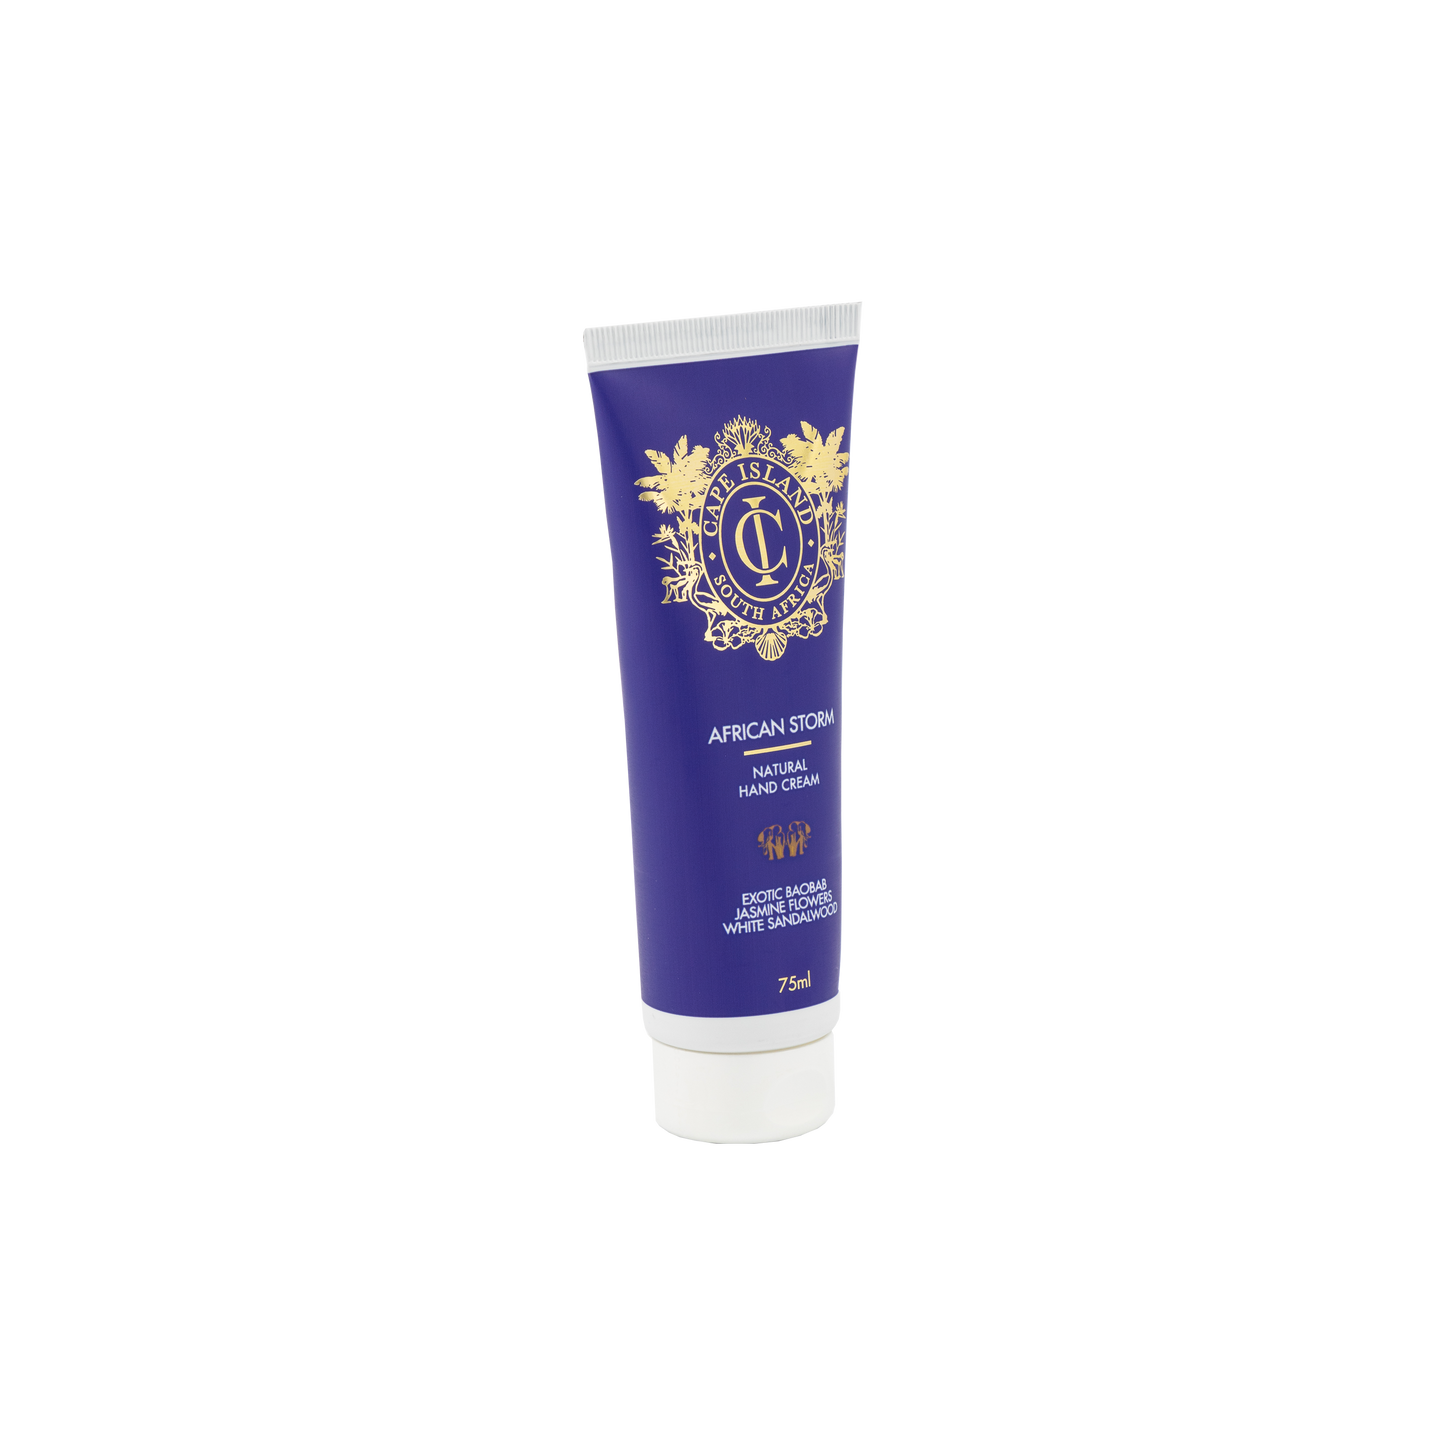 African Storm Natural Hand Cream